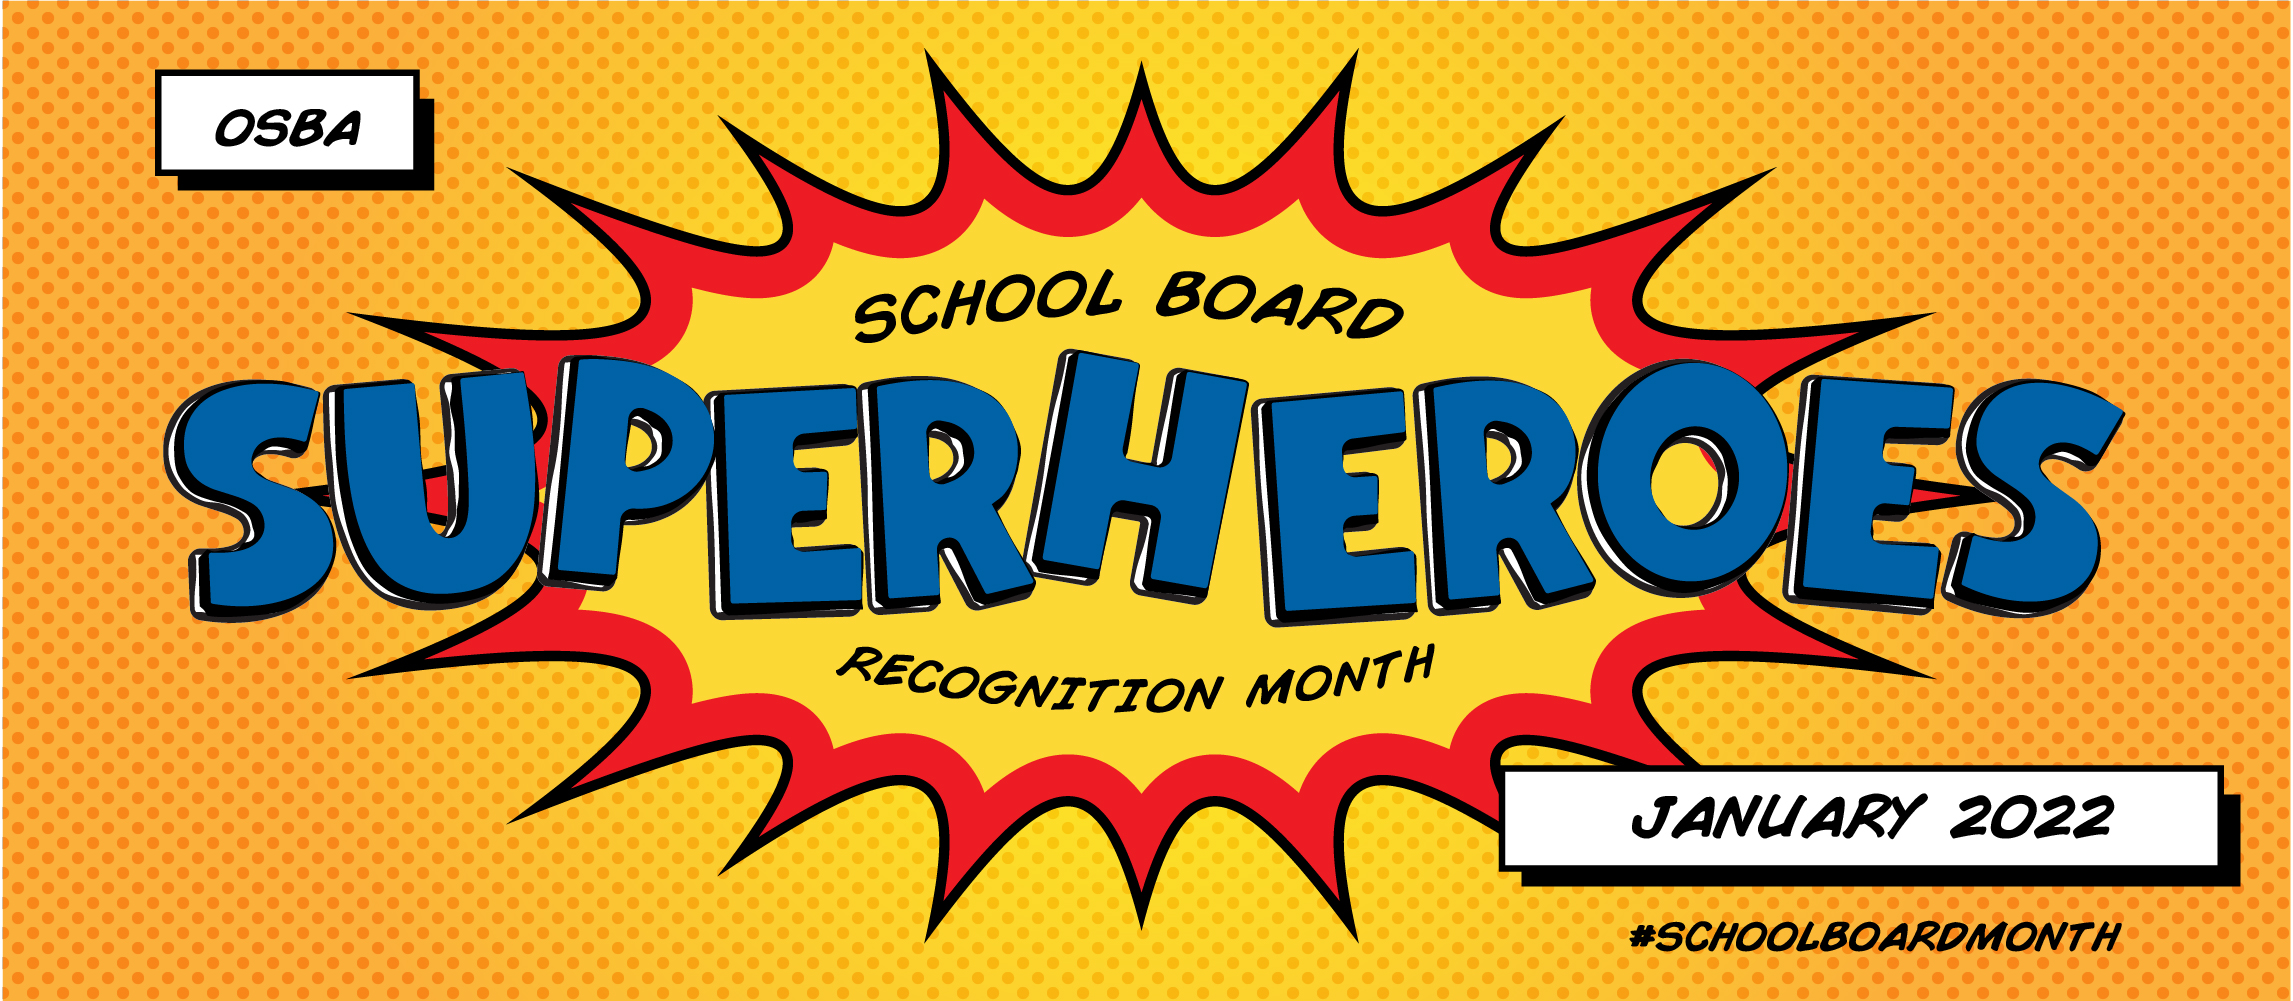 School Board Superheroes January 2022.  Recognition Month